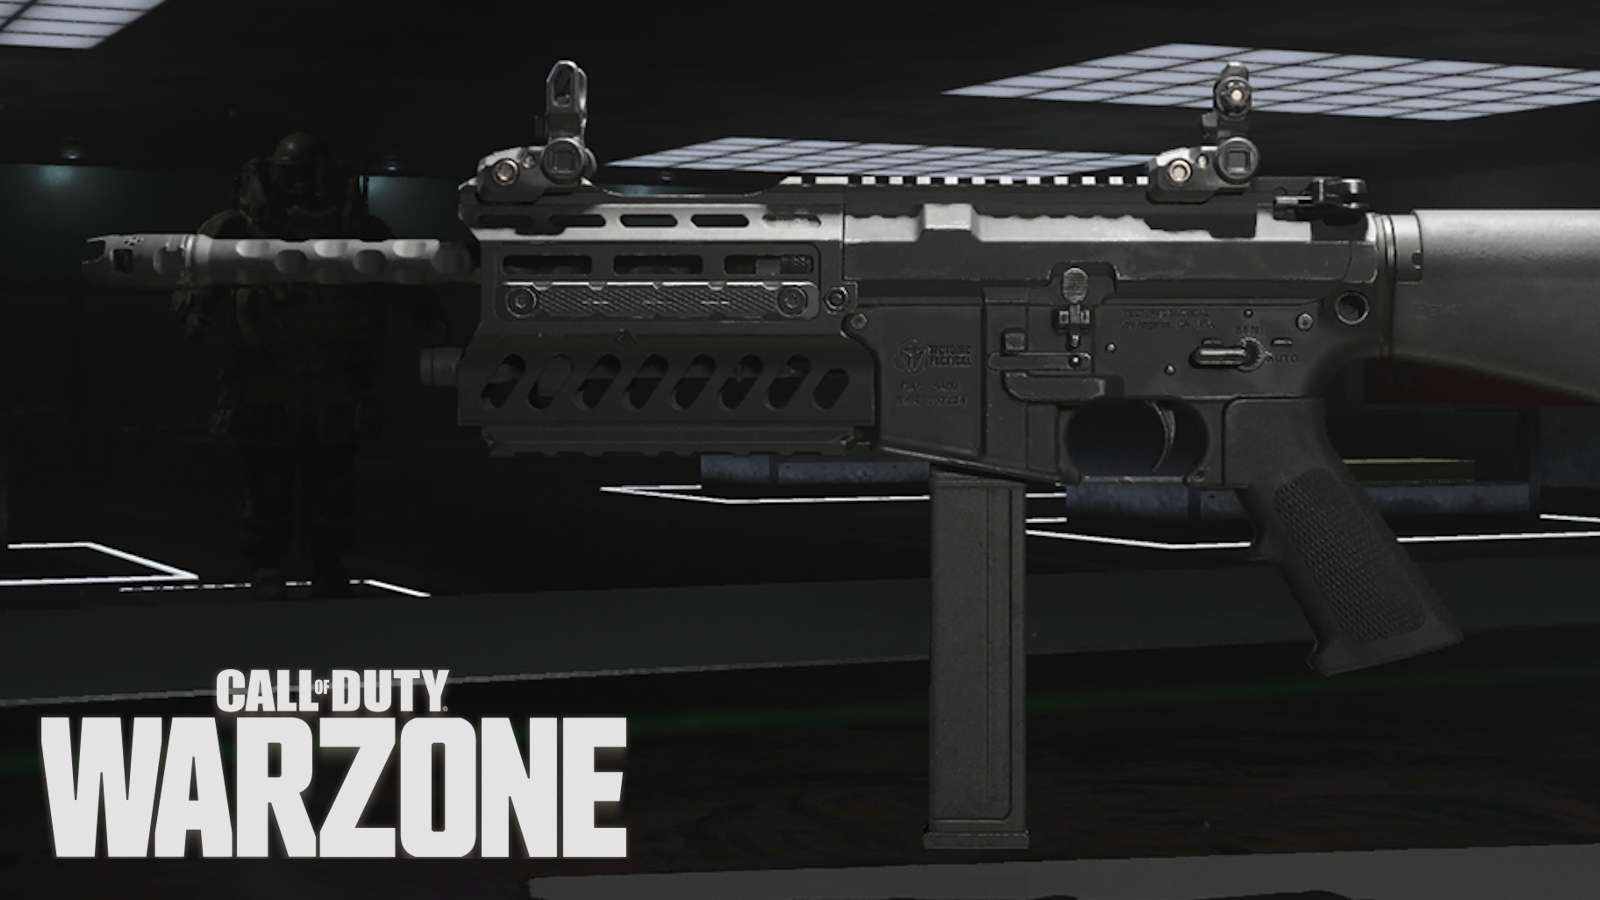 The AMR9 submachine gun in Warzone.